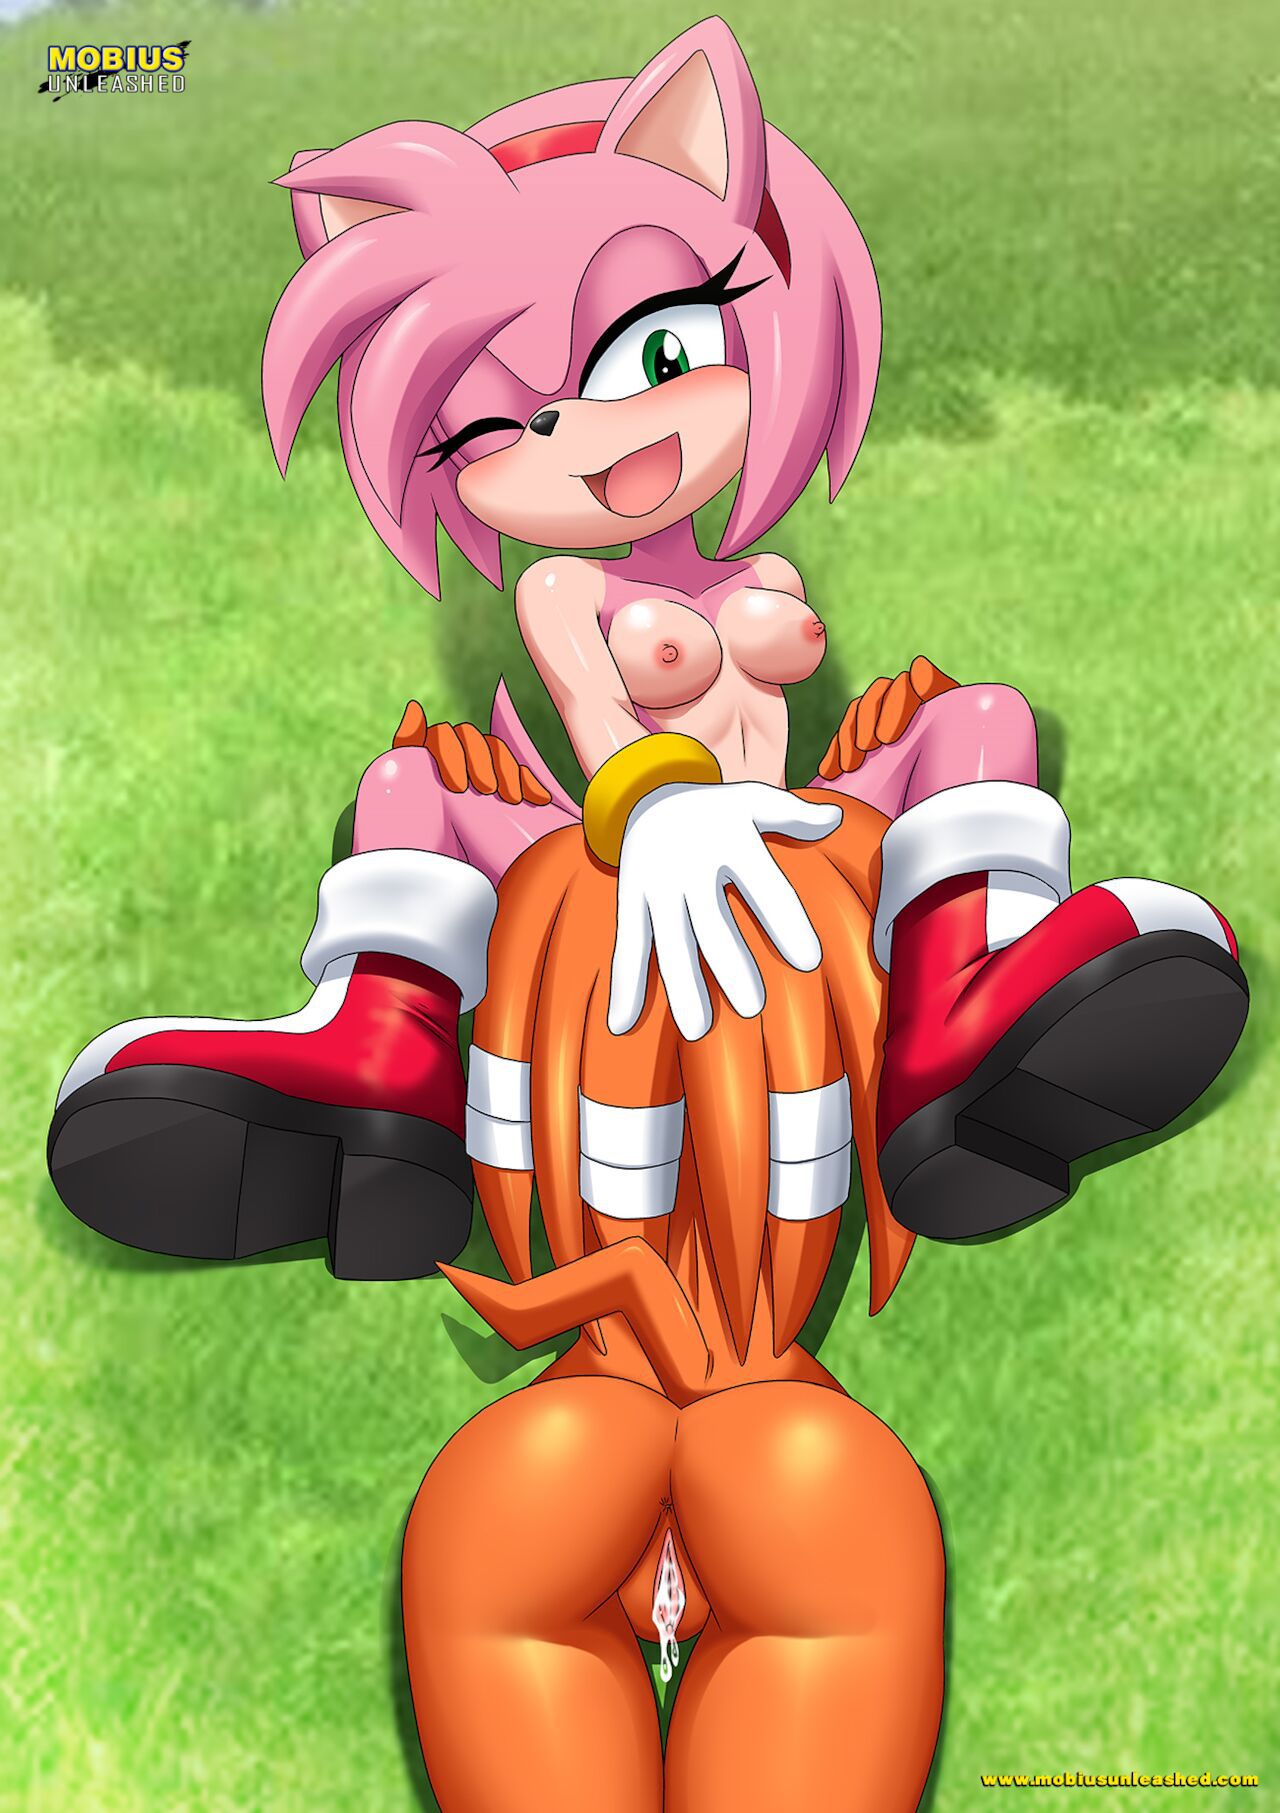 Mobius Unleashed: Tikal the Echidna 52